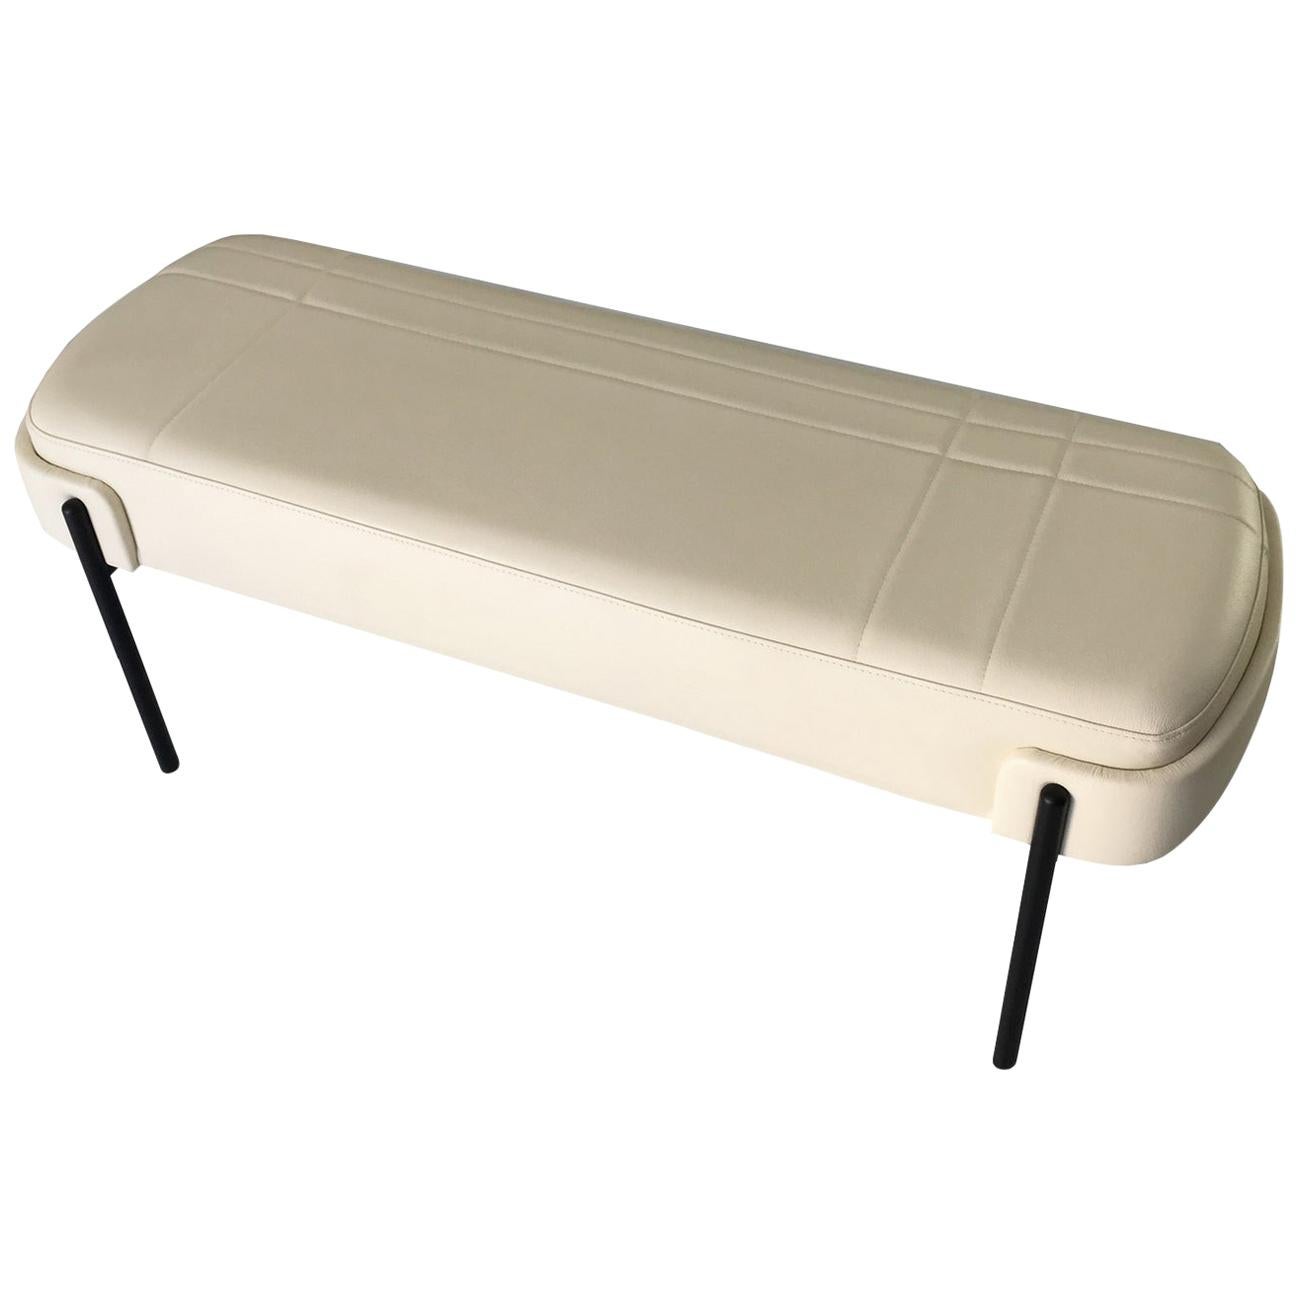 Beige Leather Bench Designed by Marco Zito